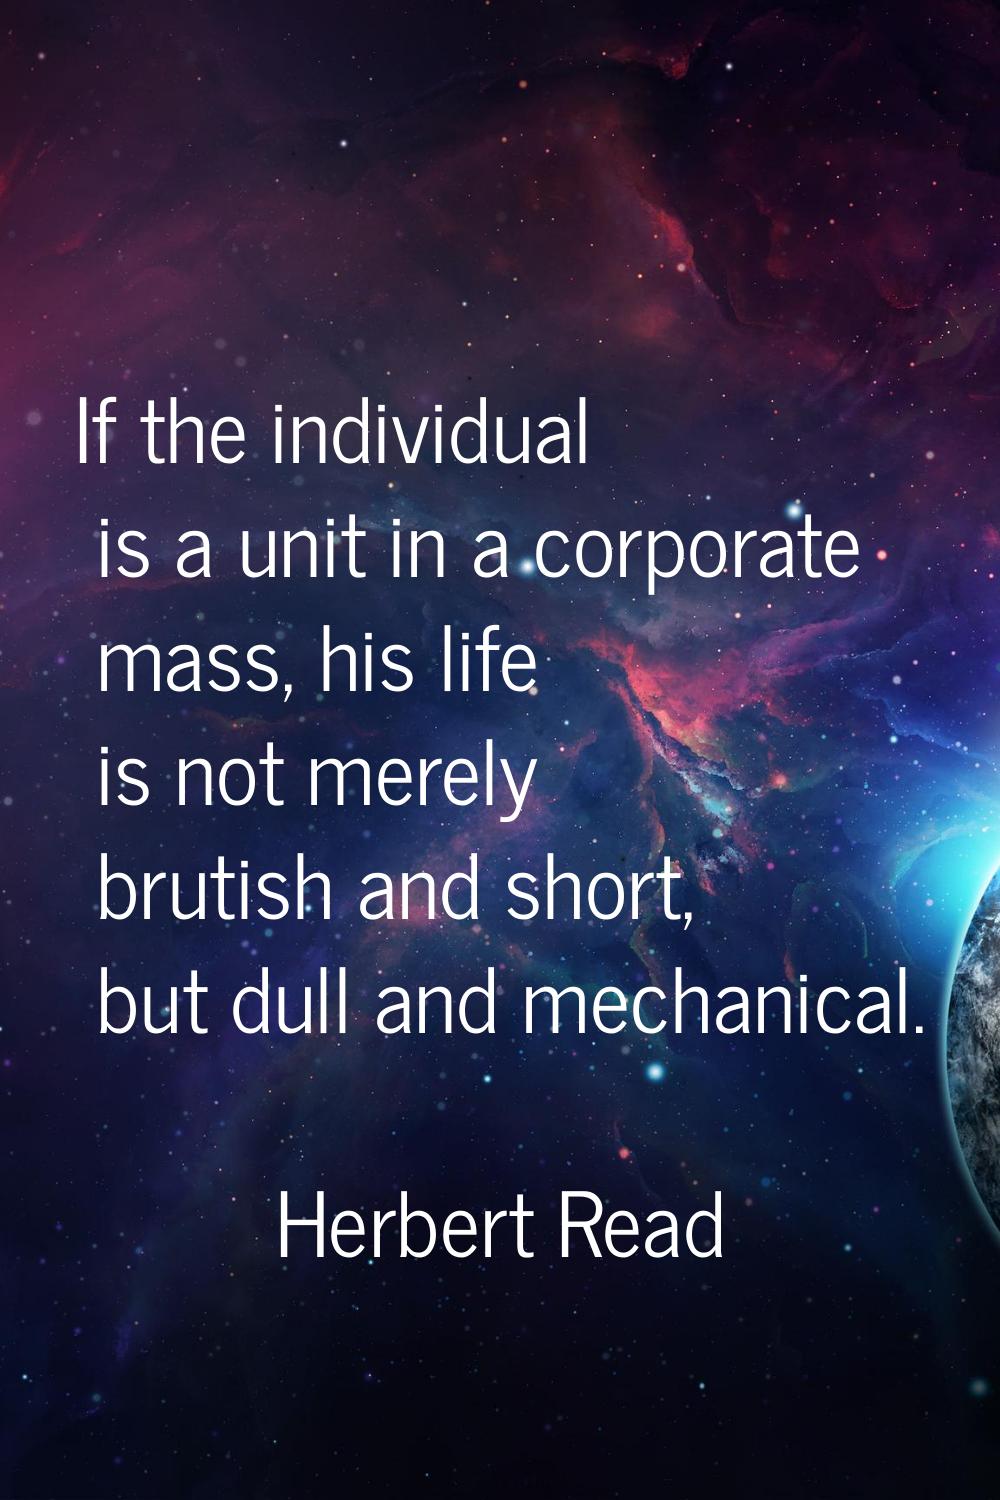 If the individual is a unit in a corporate mass, his life is not merely brutish and short, but dull